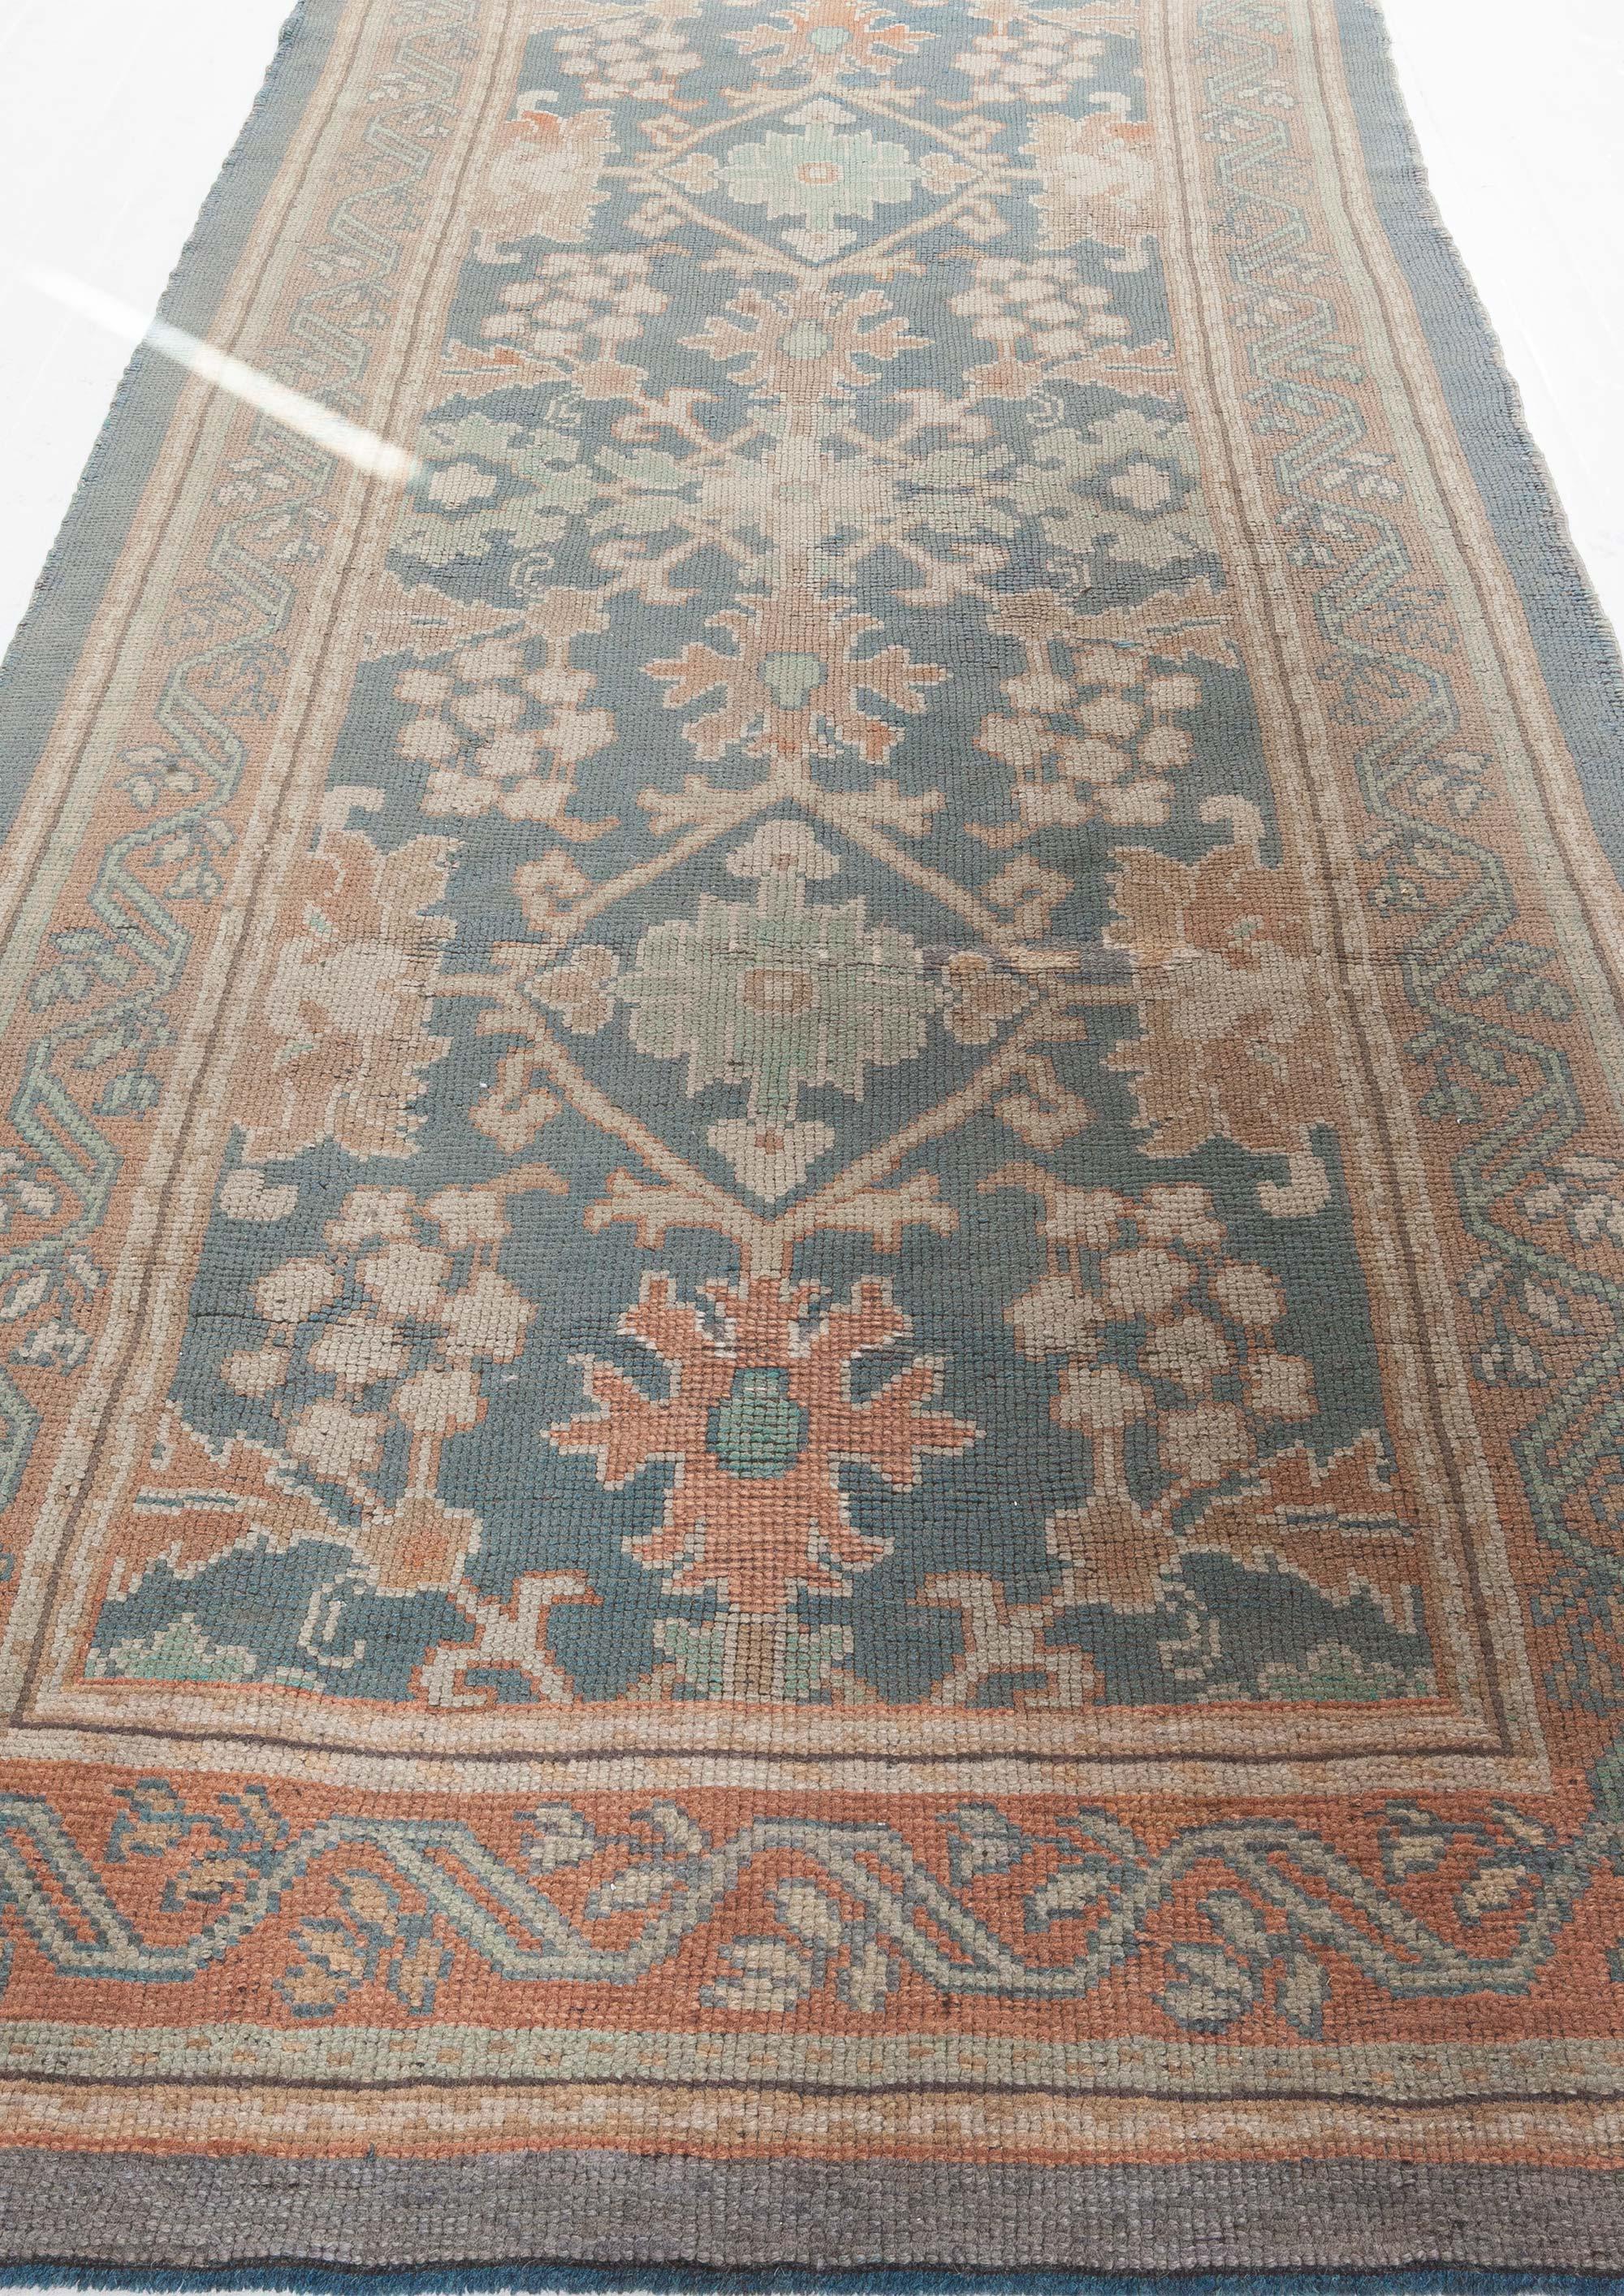 Arts and Crafts Authentic Botanic Irish Donegal Runner For Sale